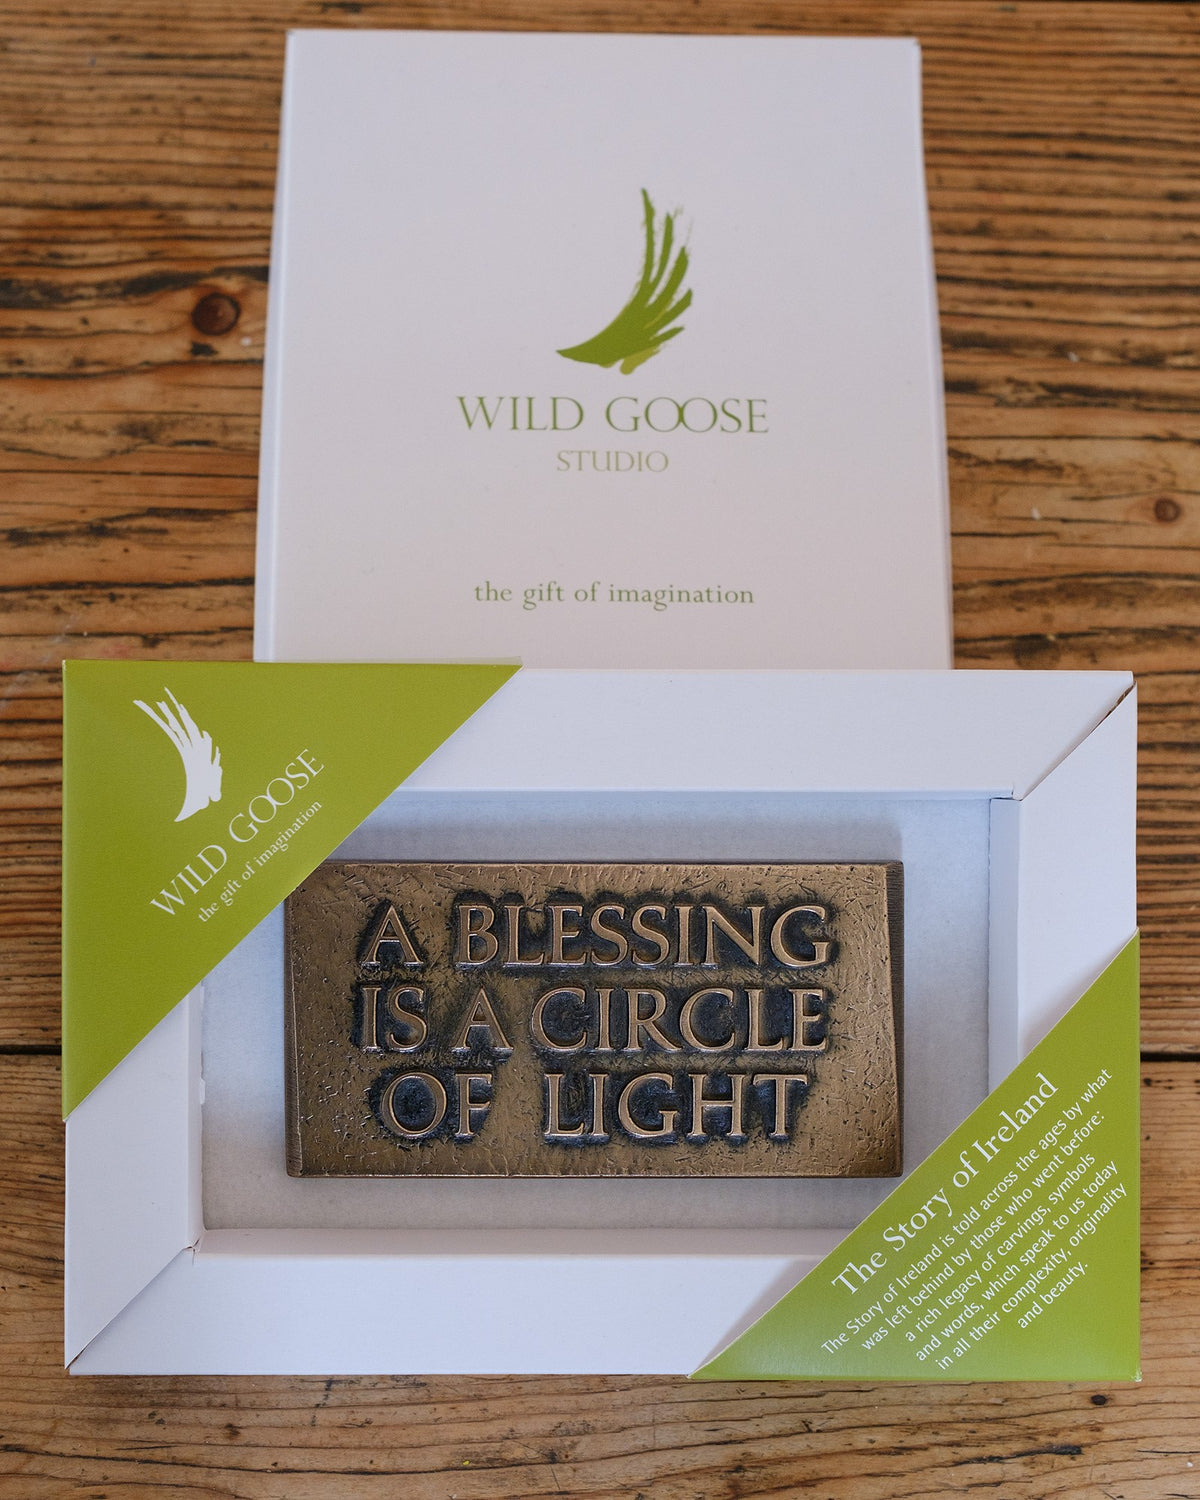 A blessing is a circle of light (wall plaque)